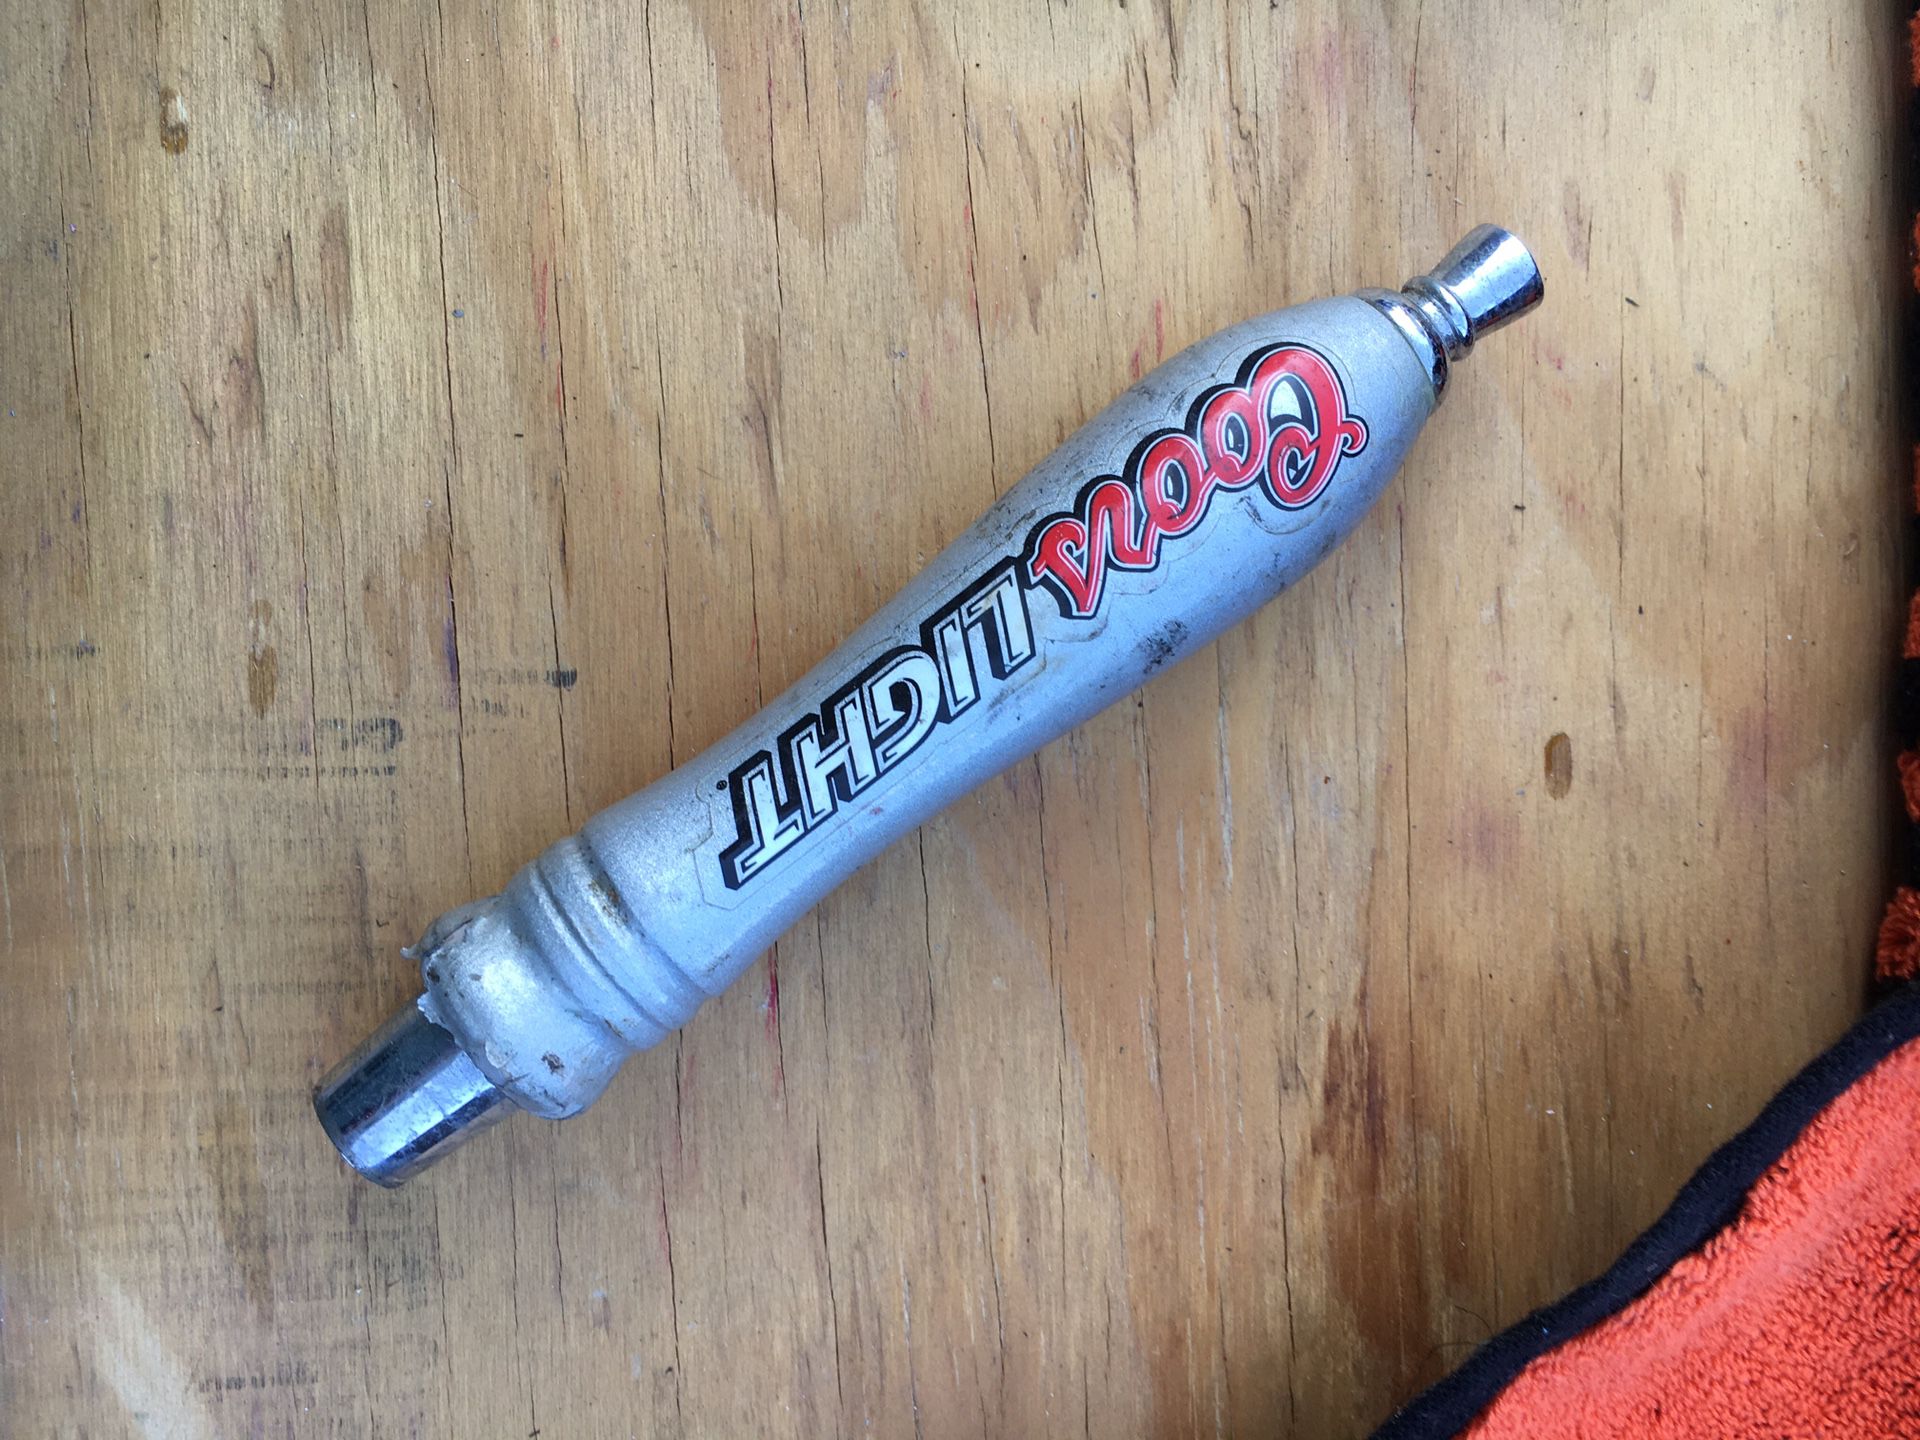 Coors Light tap handle